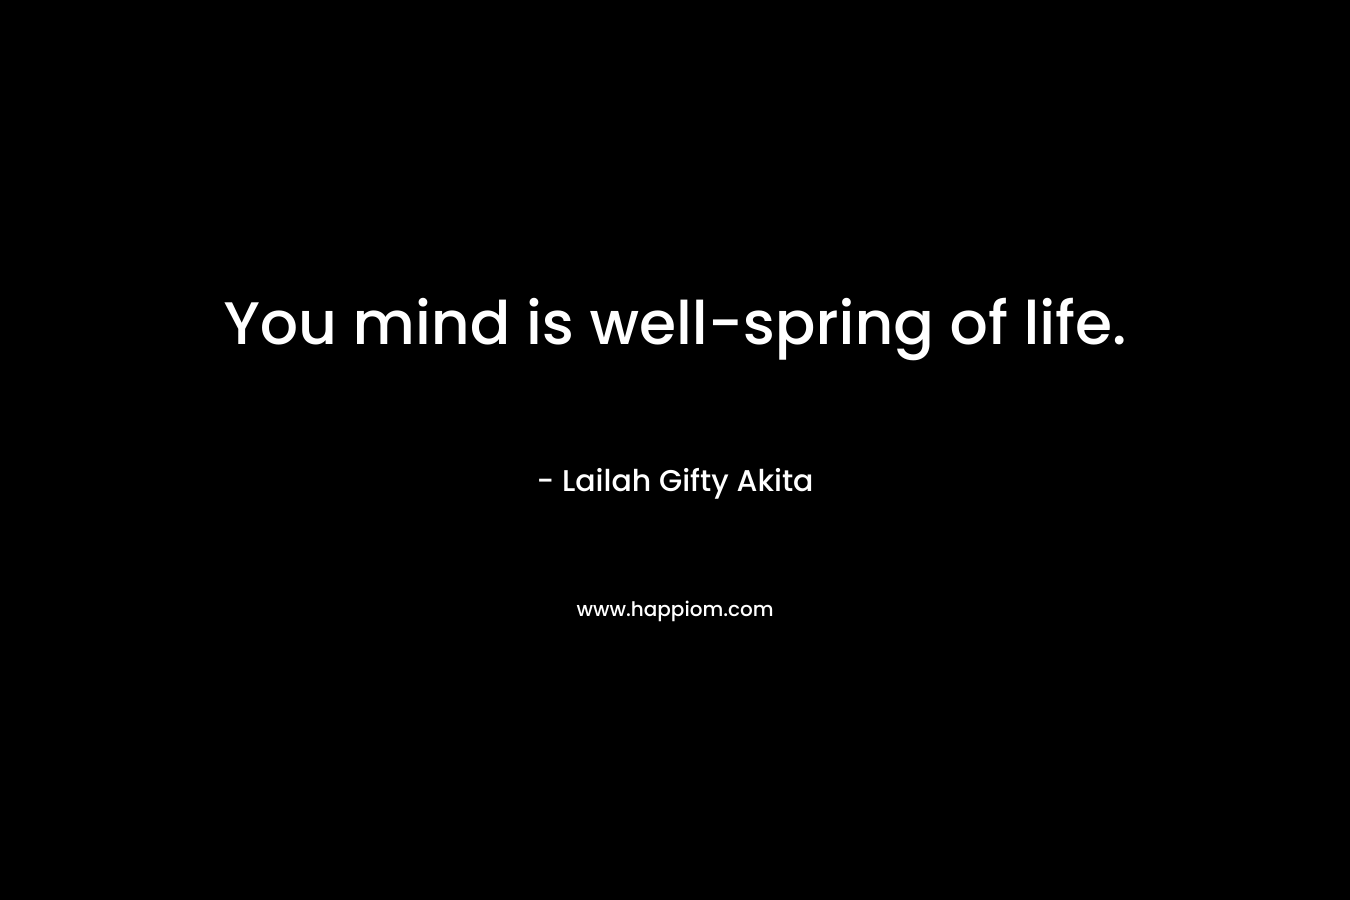 You mind is well-spring of life. – Lailah Gifty Akita